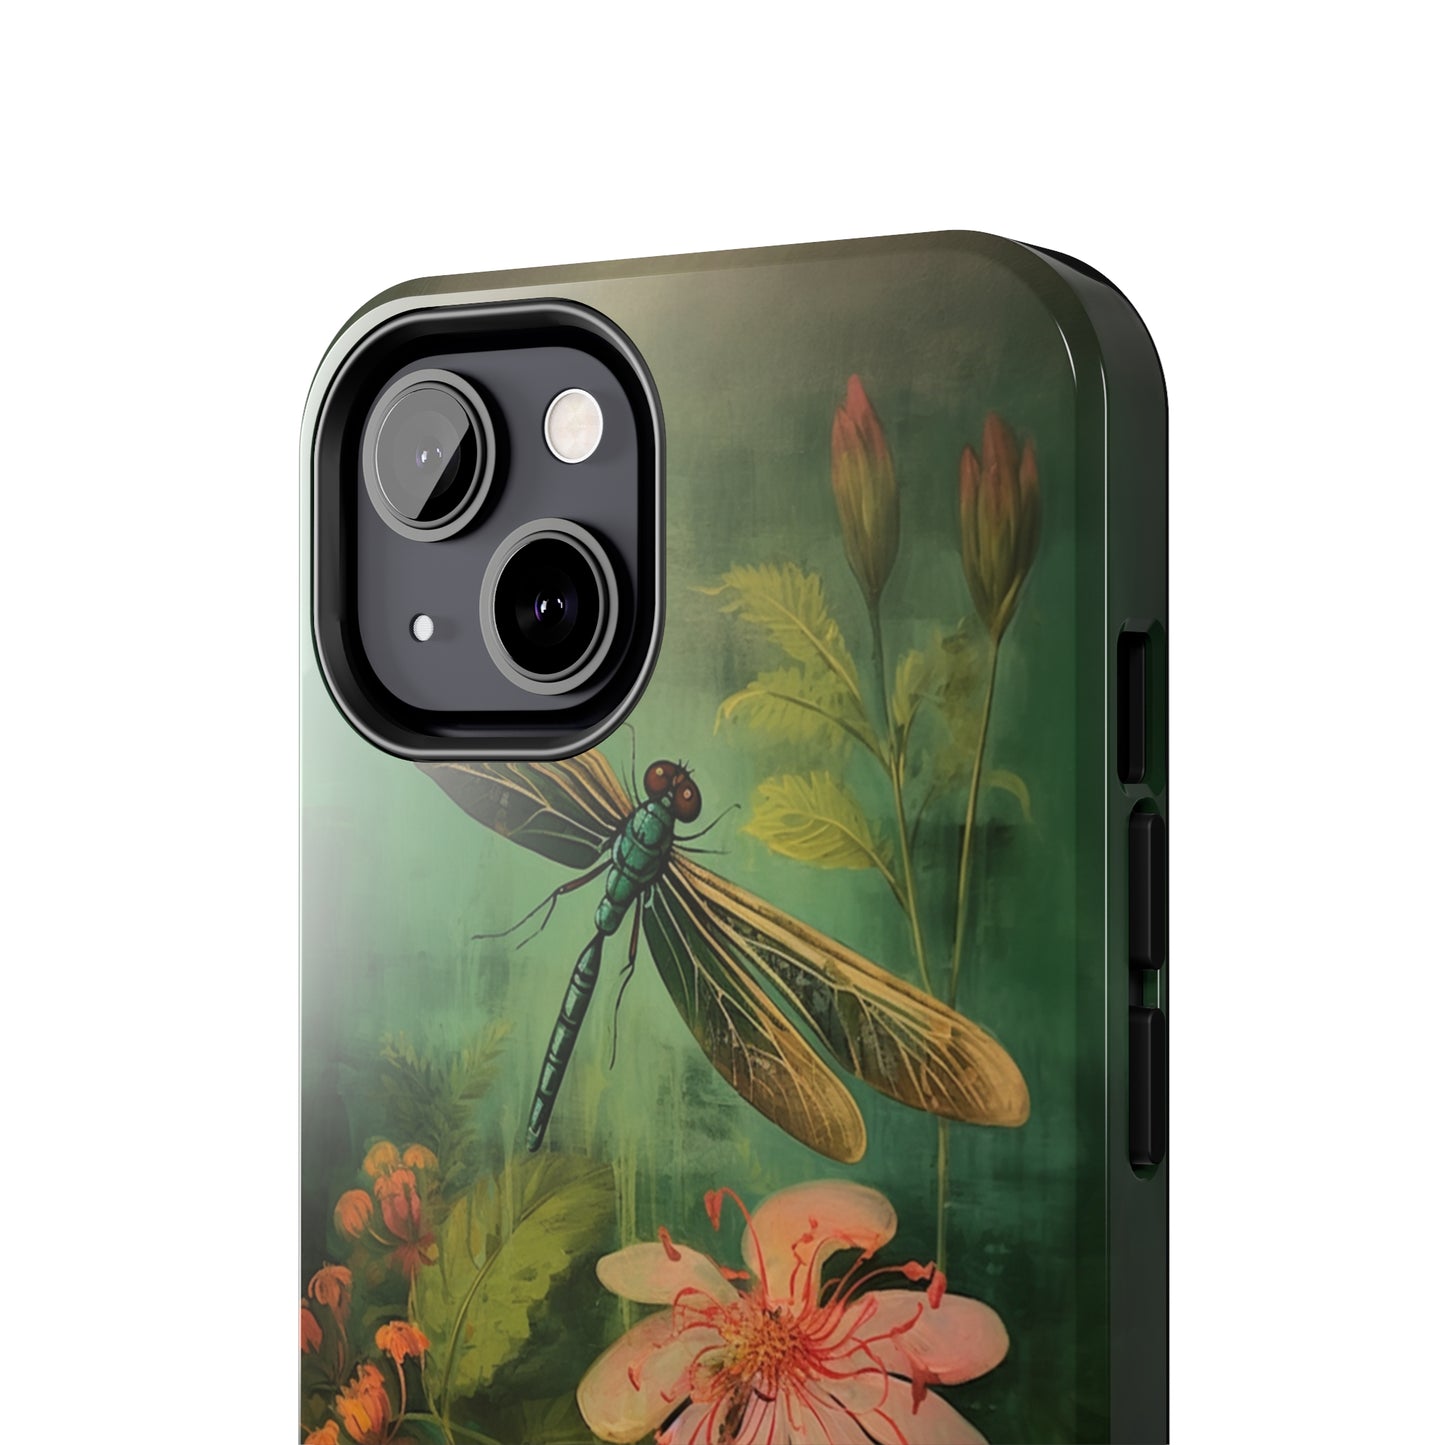 Dragonfly iPhone Case | Embrace Nature's Elegance and Protection